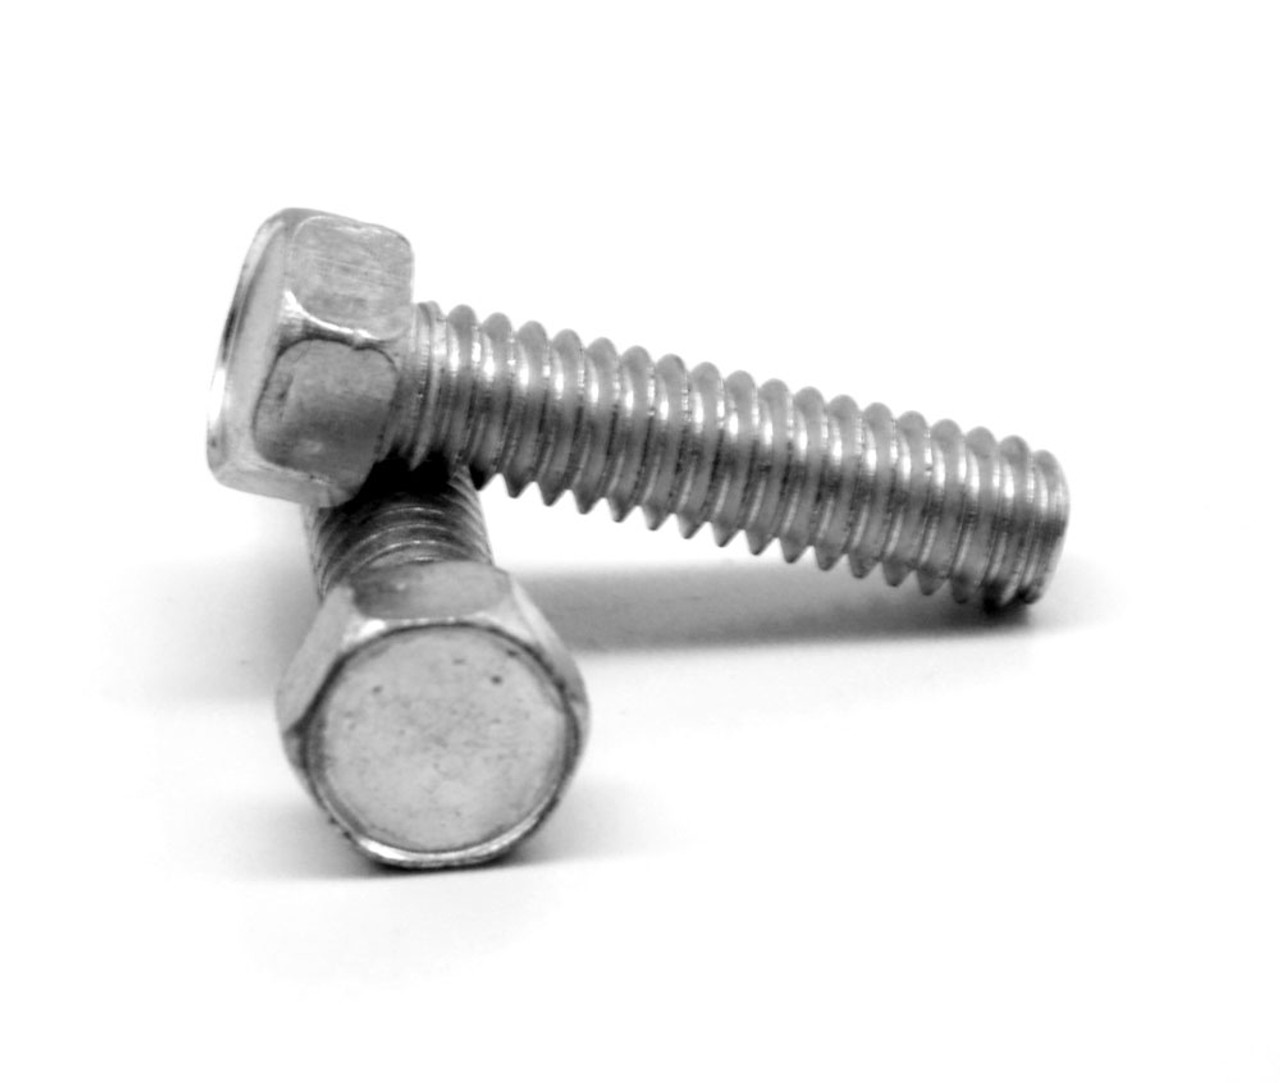 #8-32 x 7/16" (FT) Coarse Thread Machine Screw Indented Hex Head Low Carbon Steel Zinc Plated